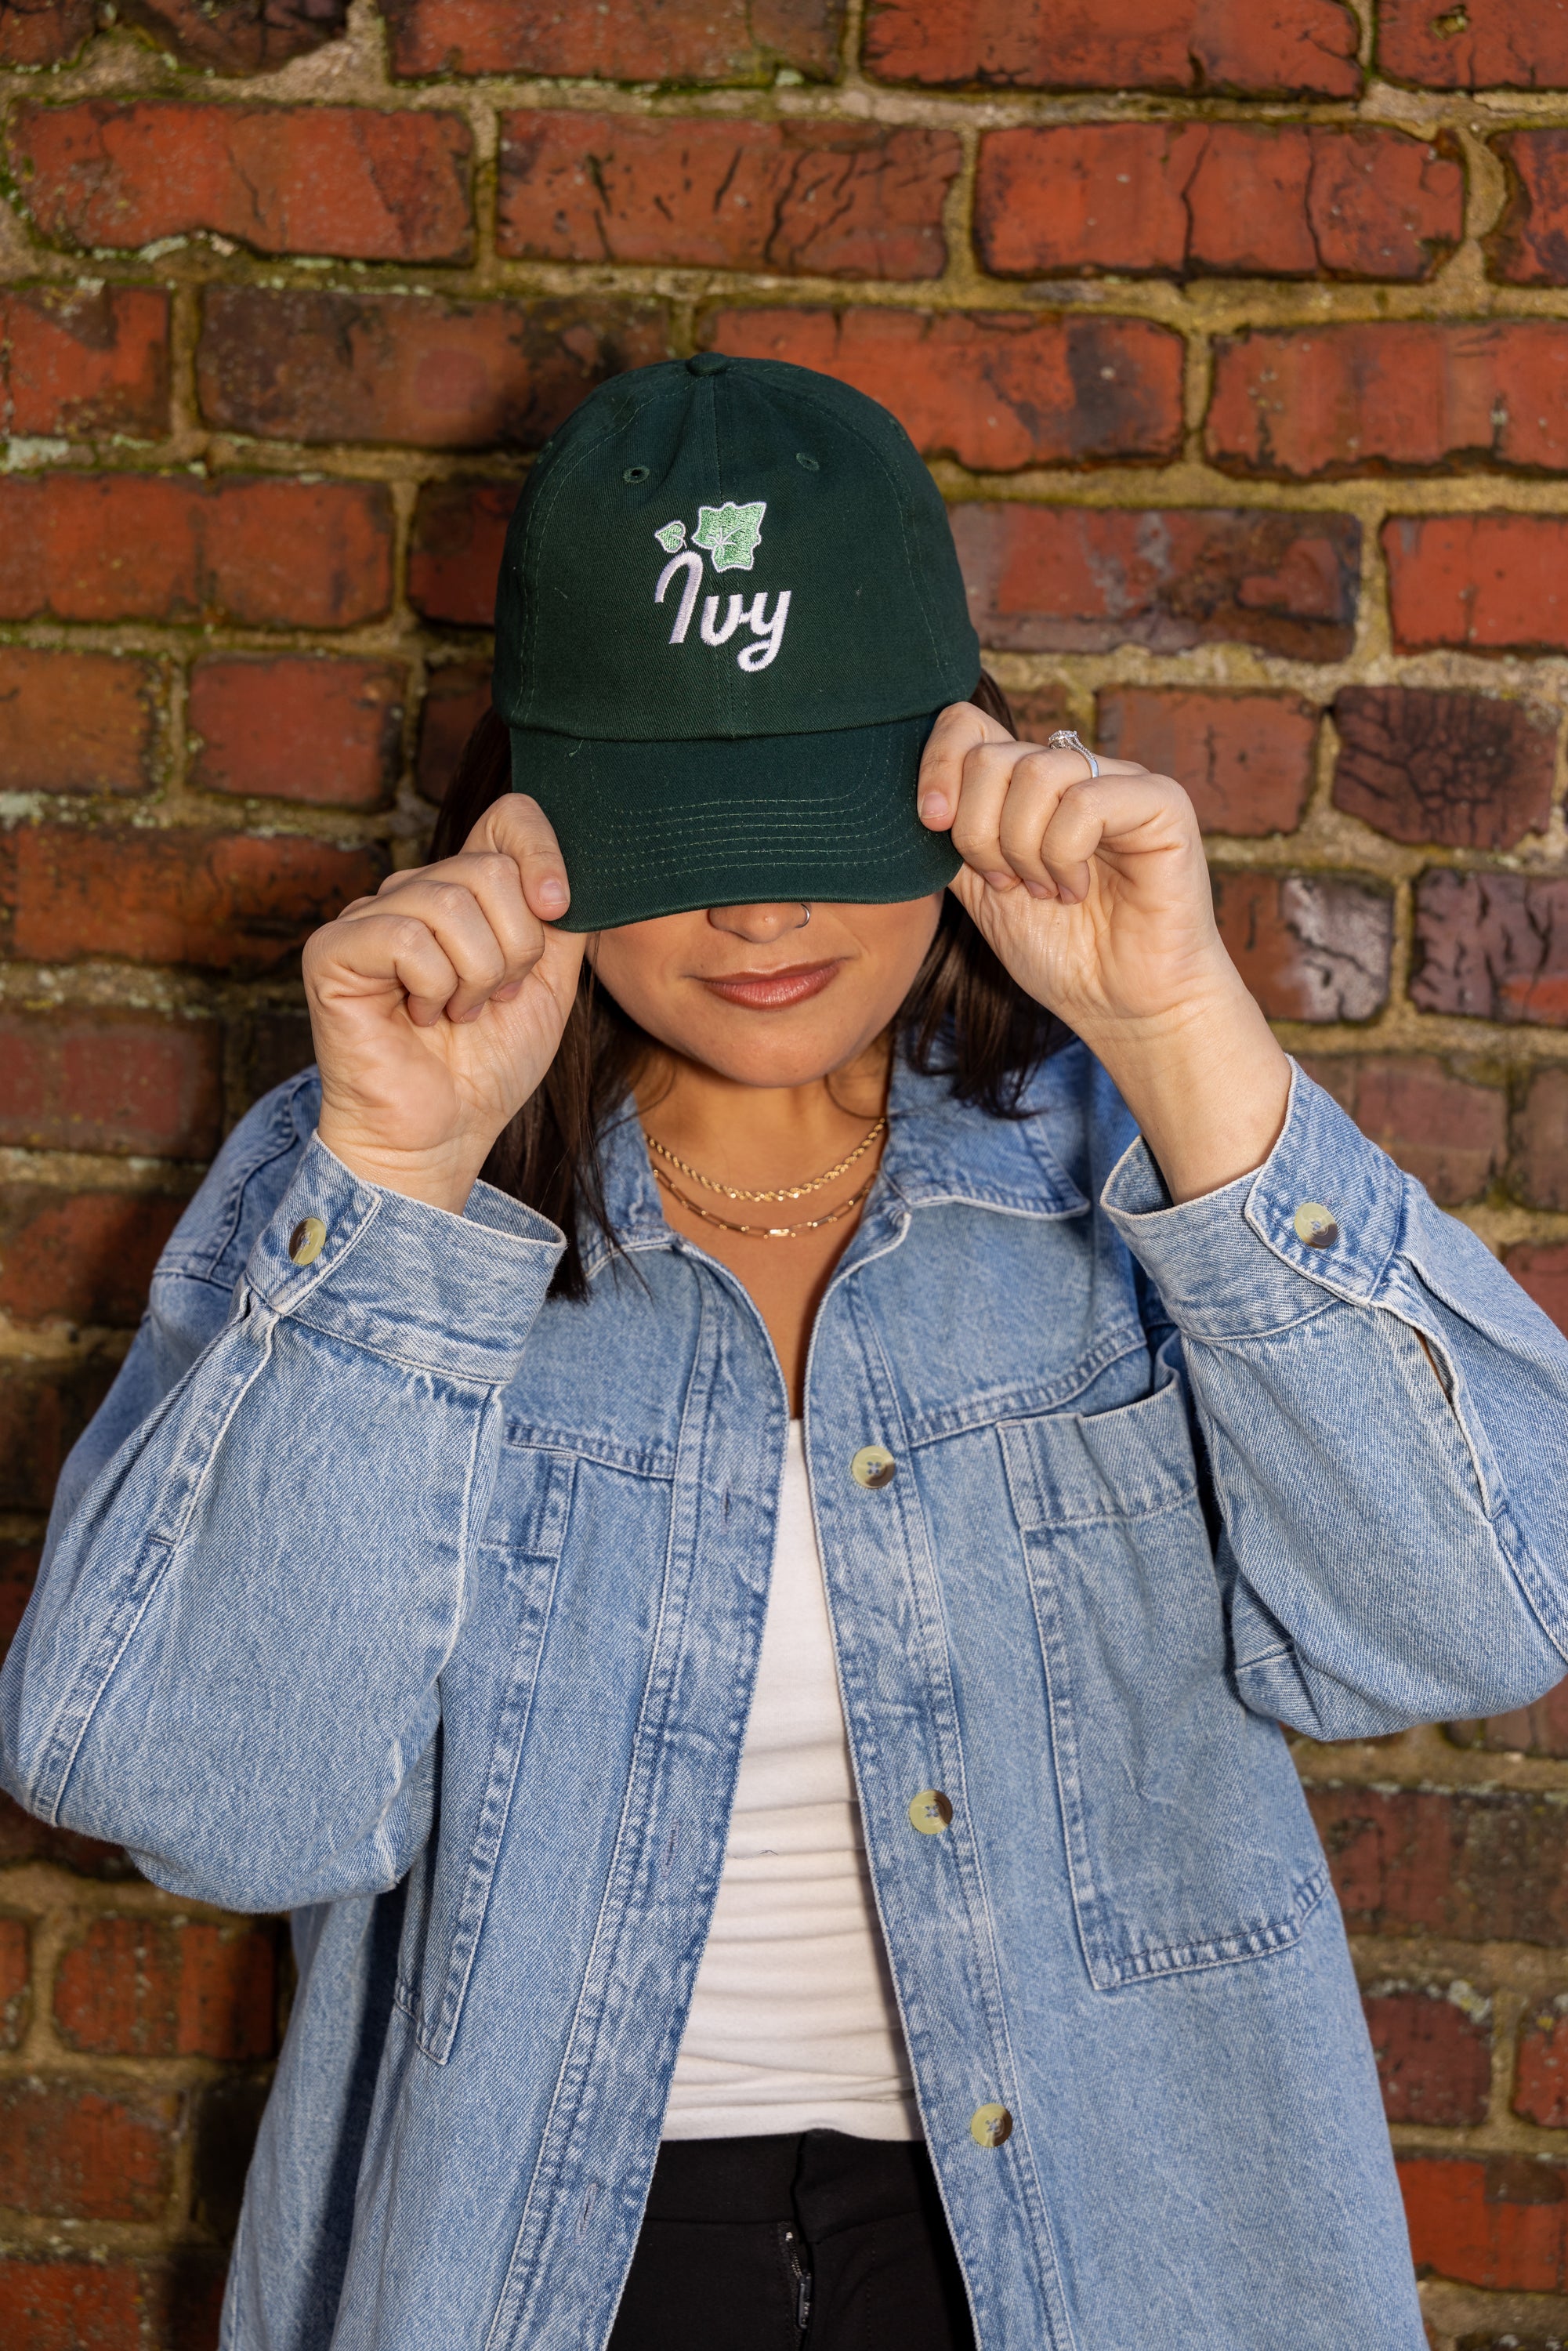 Ivy with Cluster Green Dad Hat